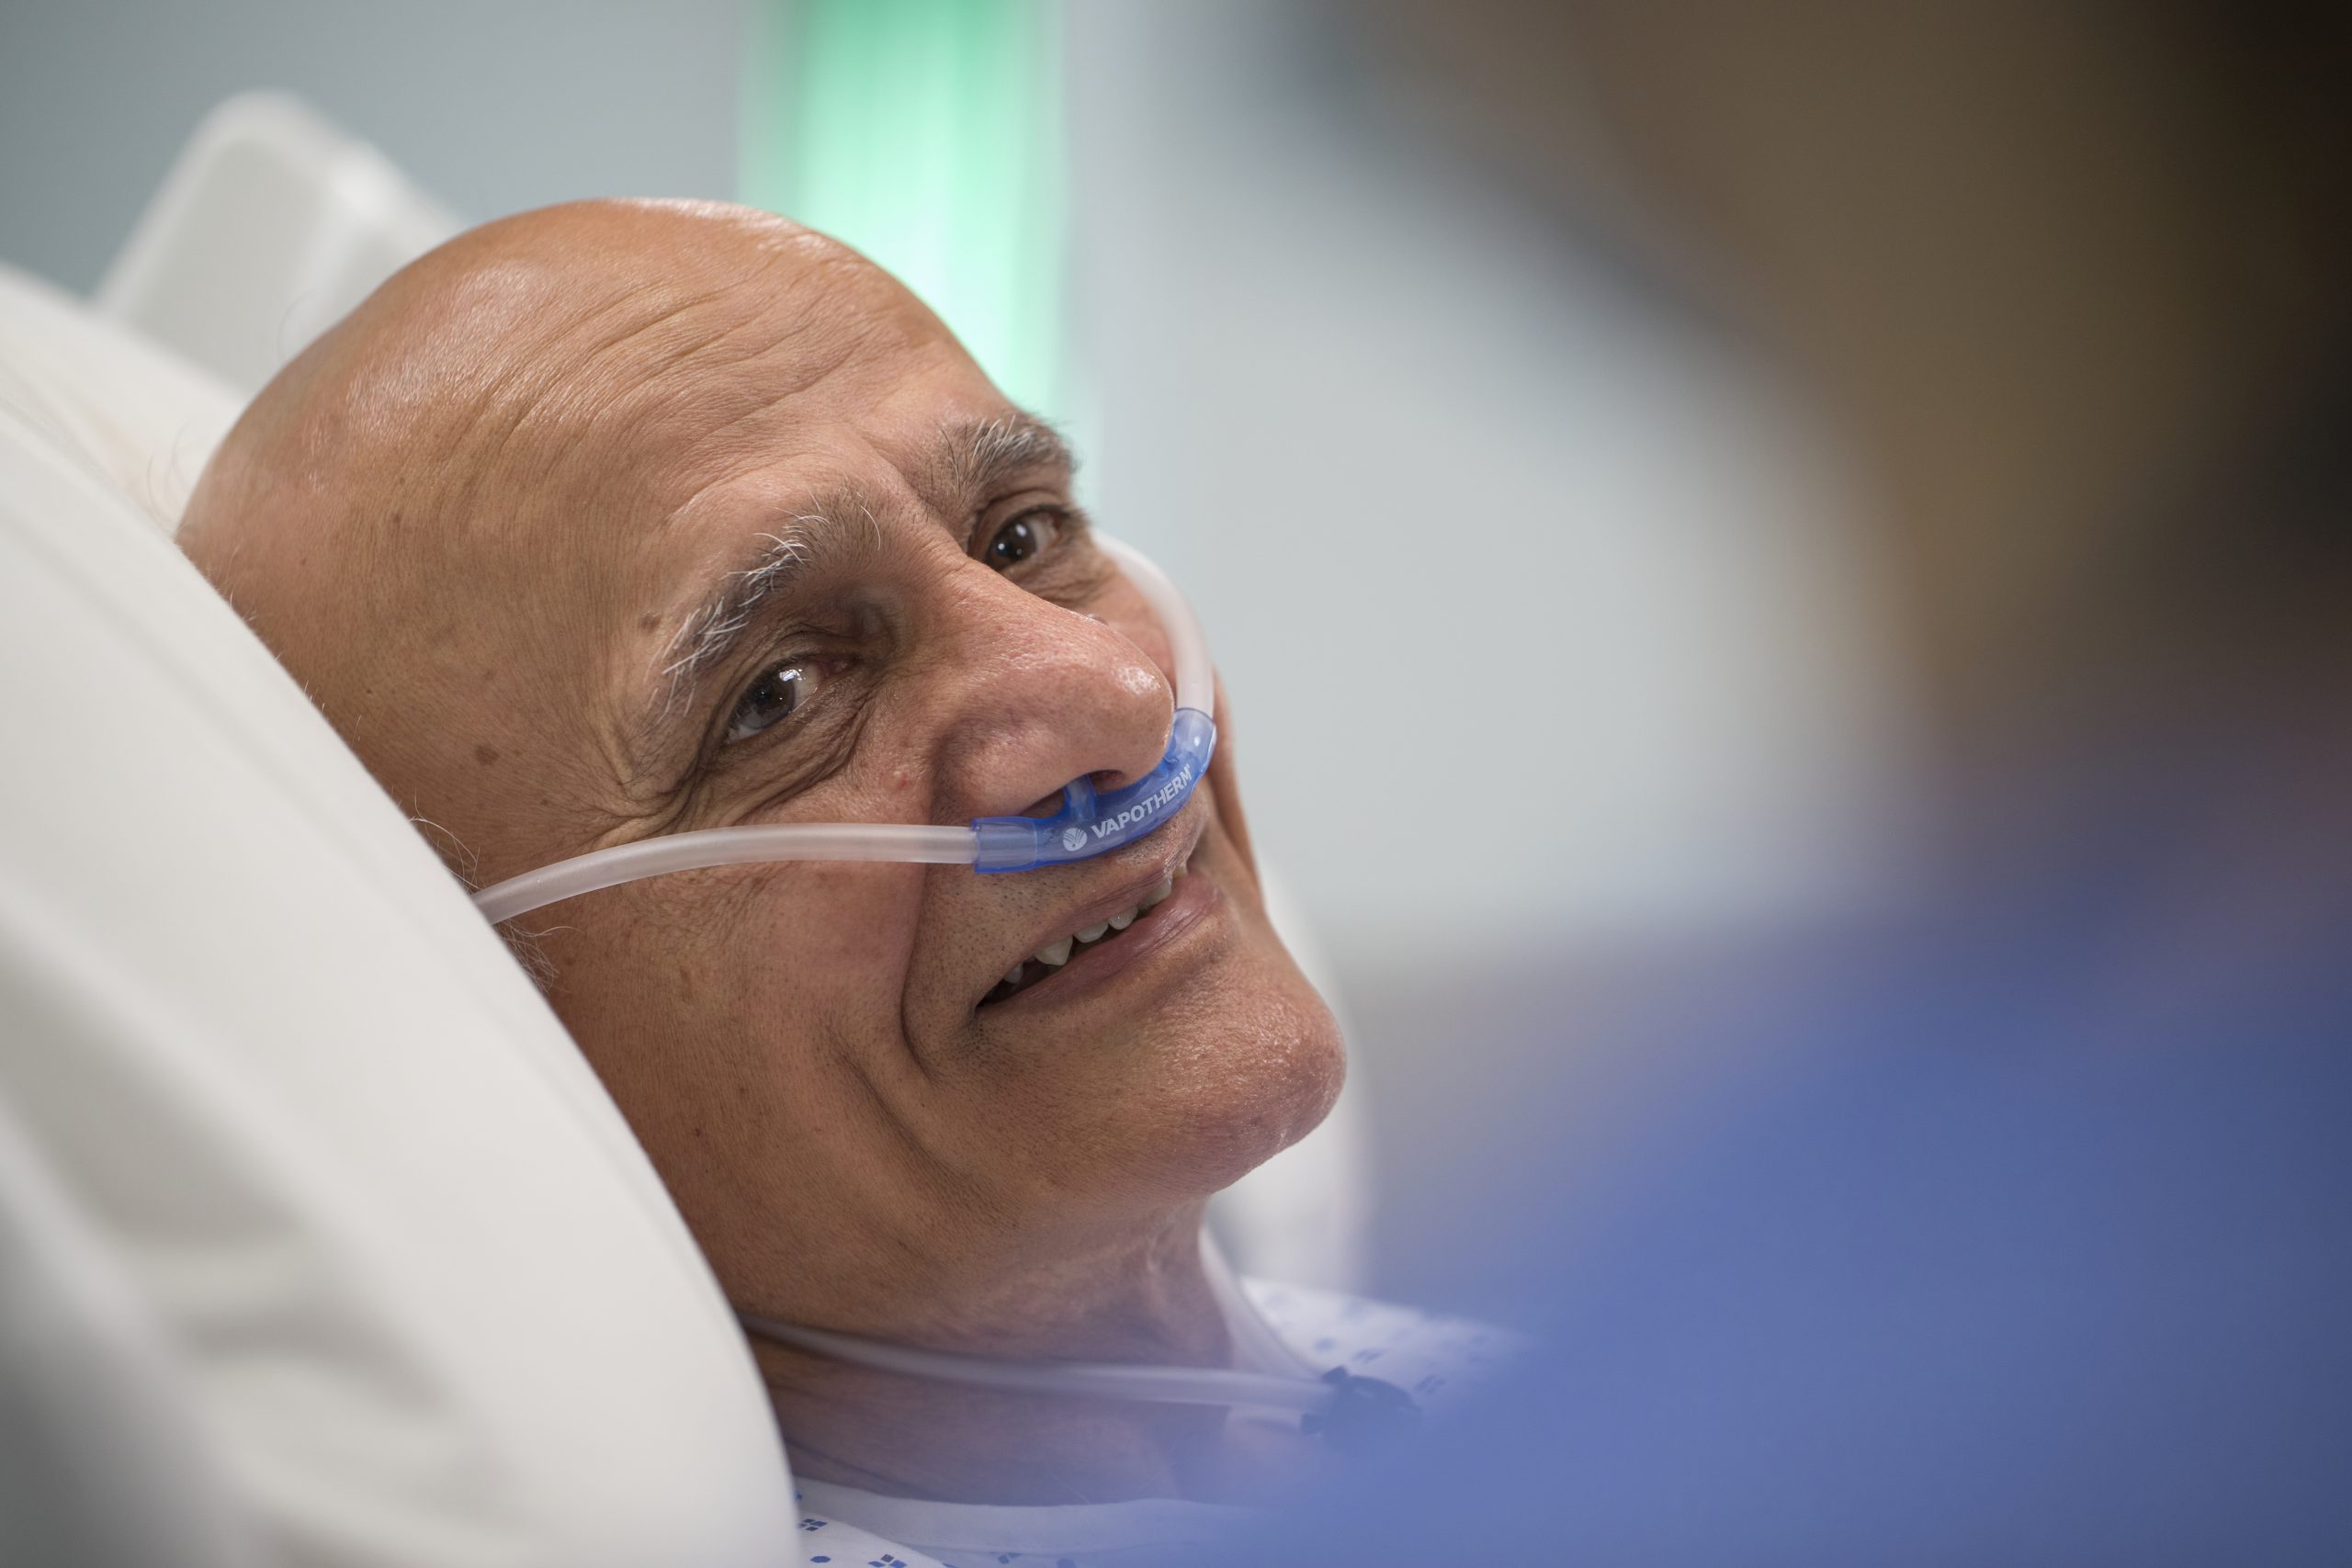 Man smiling with HVT 2.0 cannula